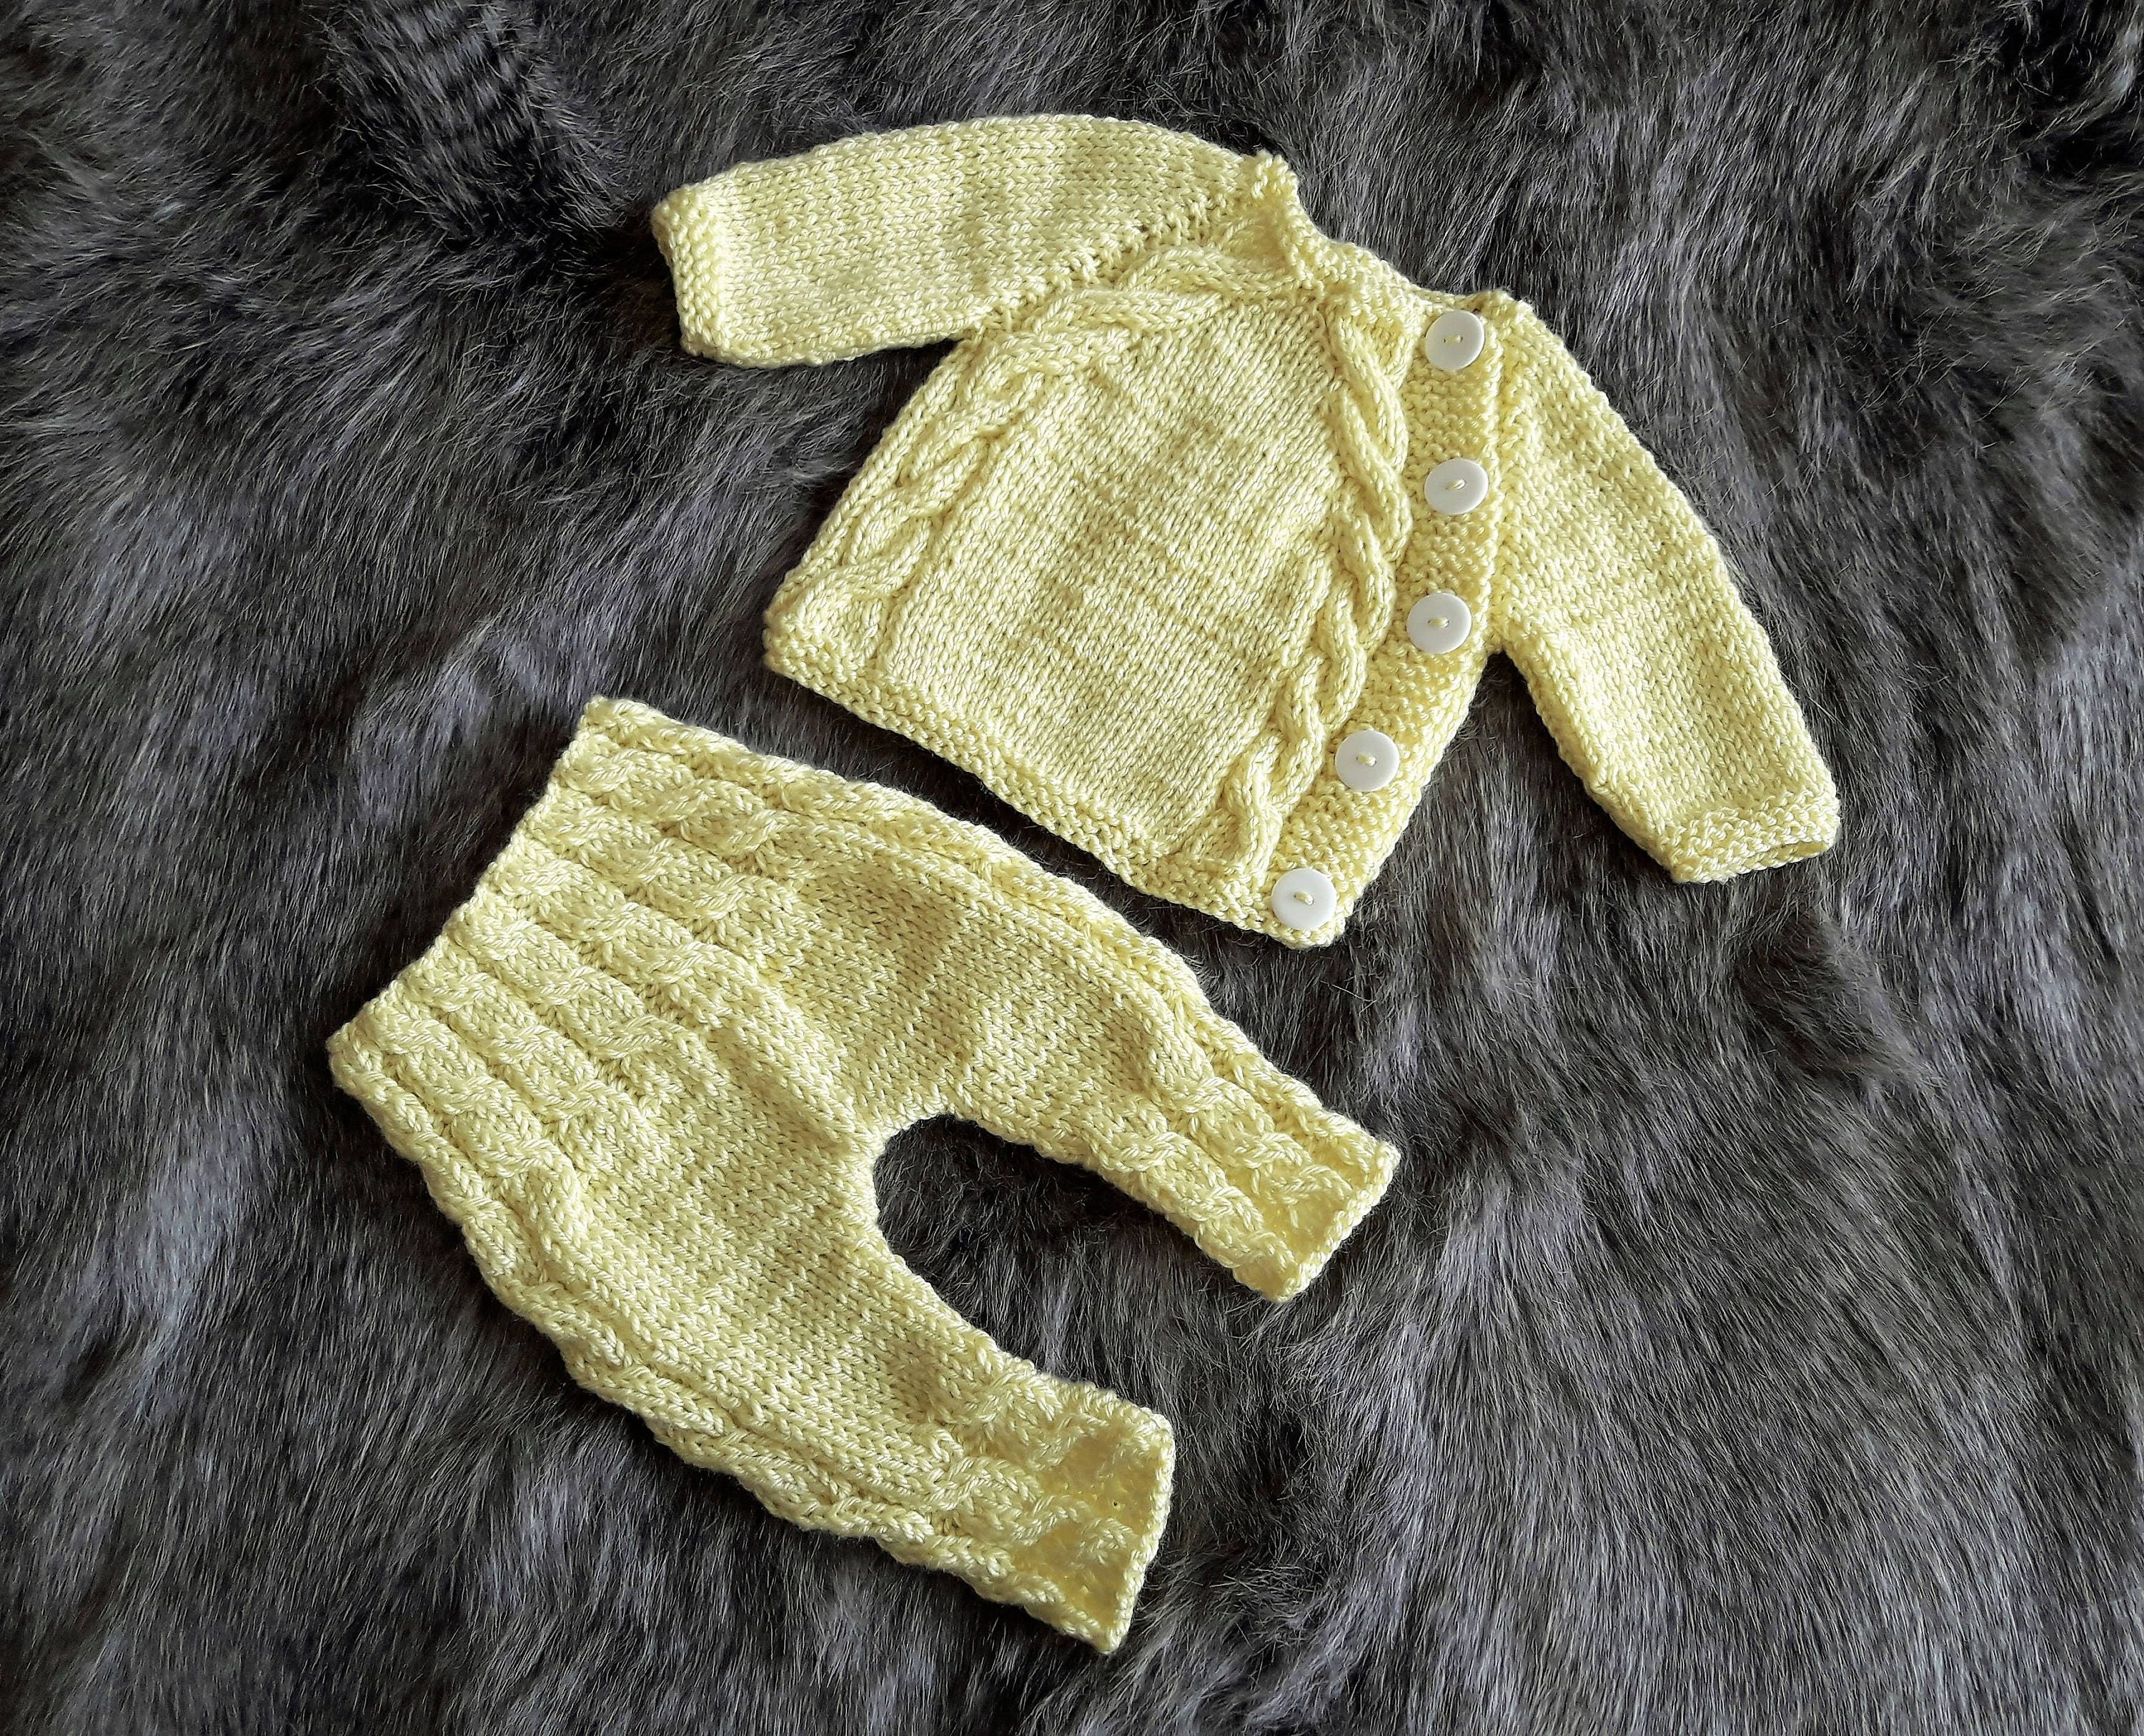 Knitted Yellow Baby coming home outfit - Knit Baby Outfit - Knitted ...